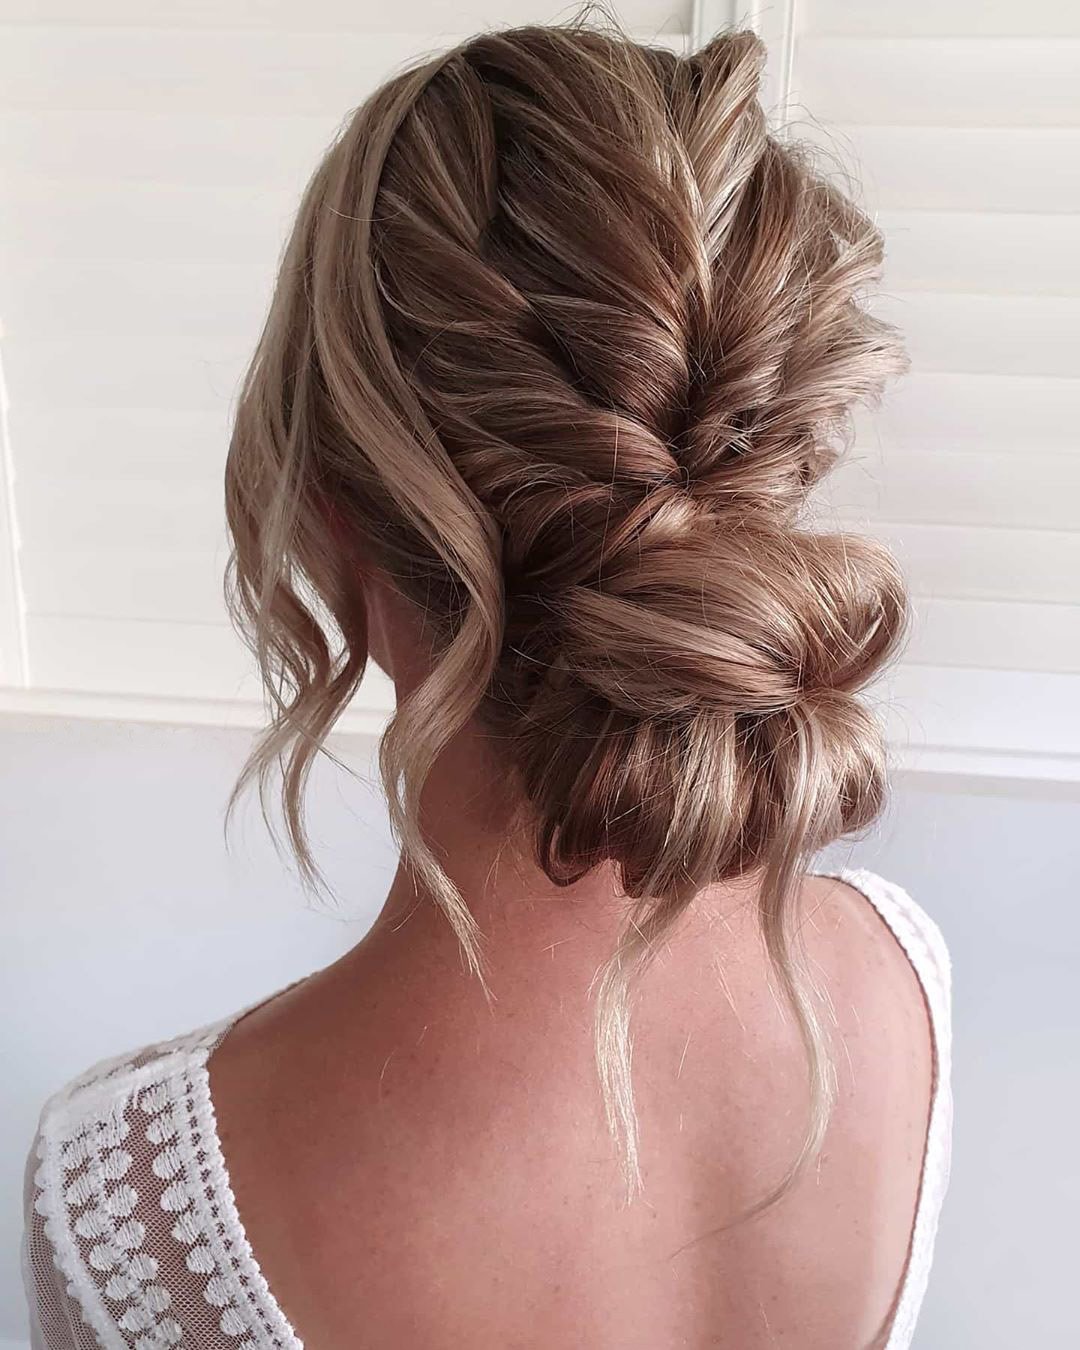 rustic wedding hairstyles updo swept low bun with loose curls cathughesxo